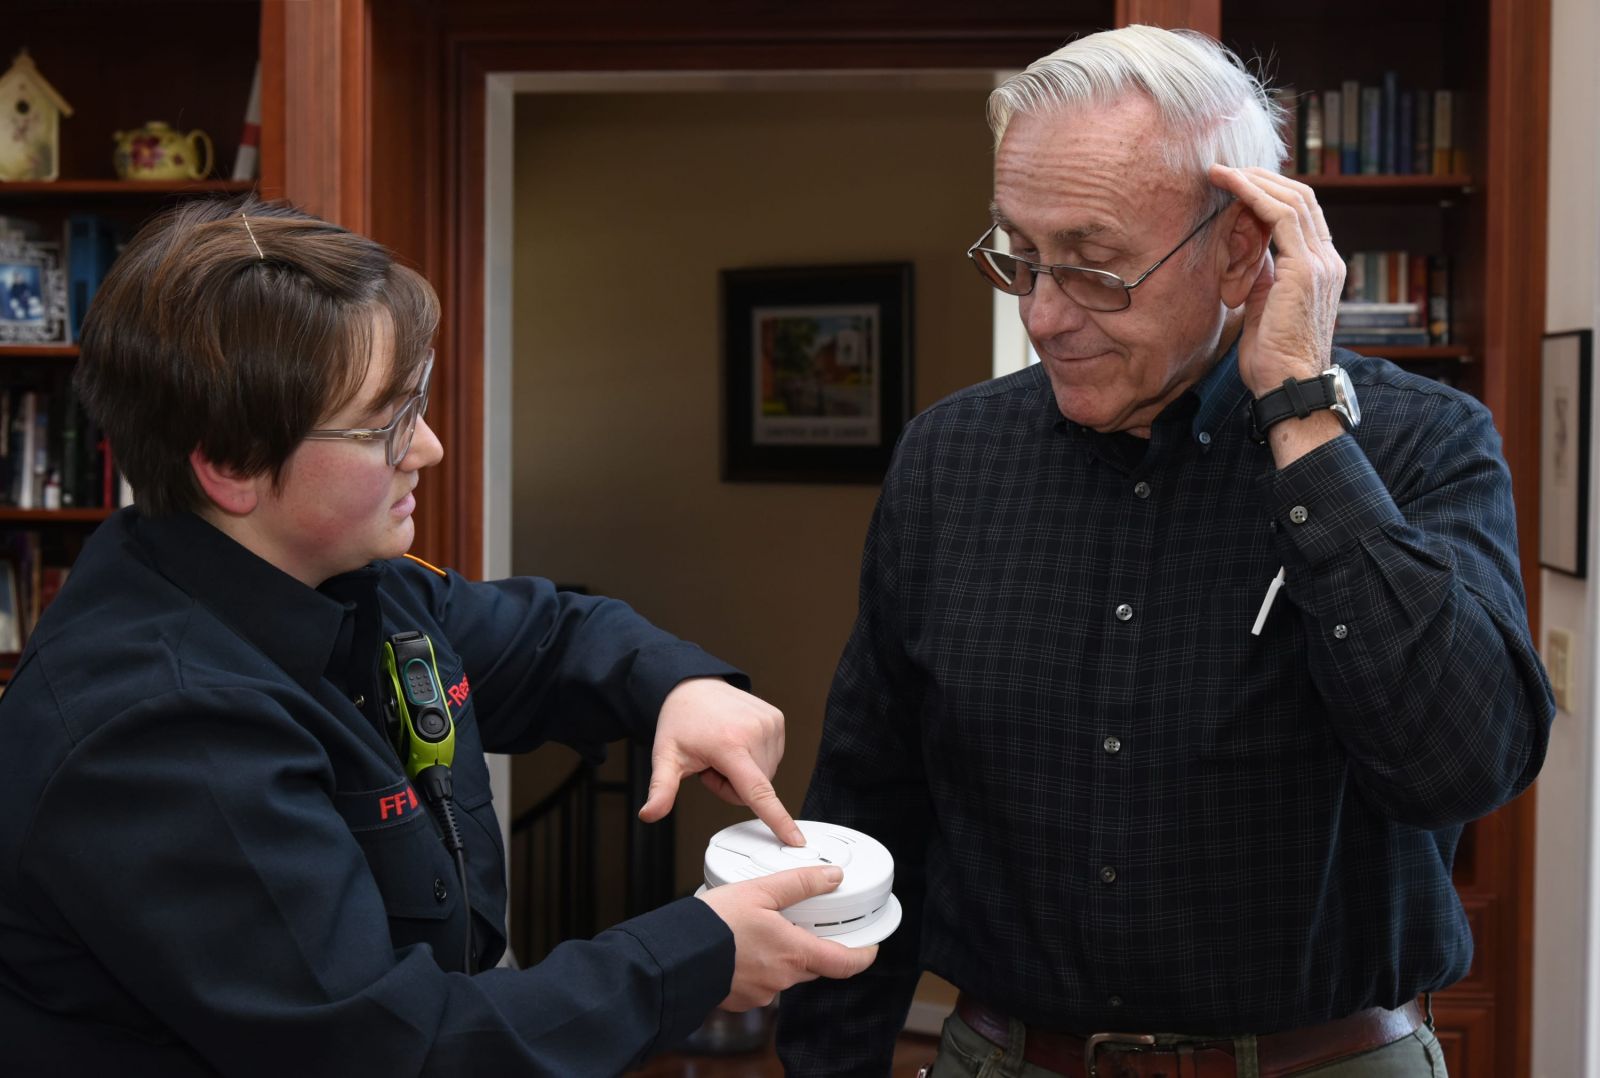 A fire safety technician tests the sound levels with an older adult who has hearing loss. 